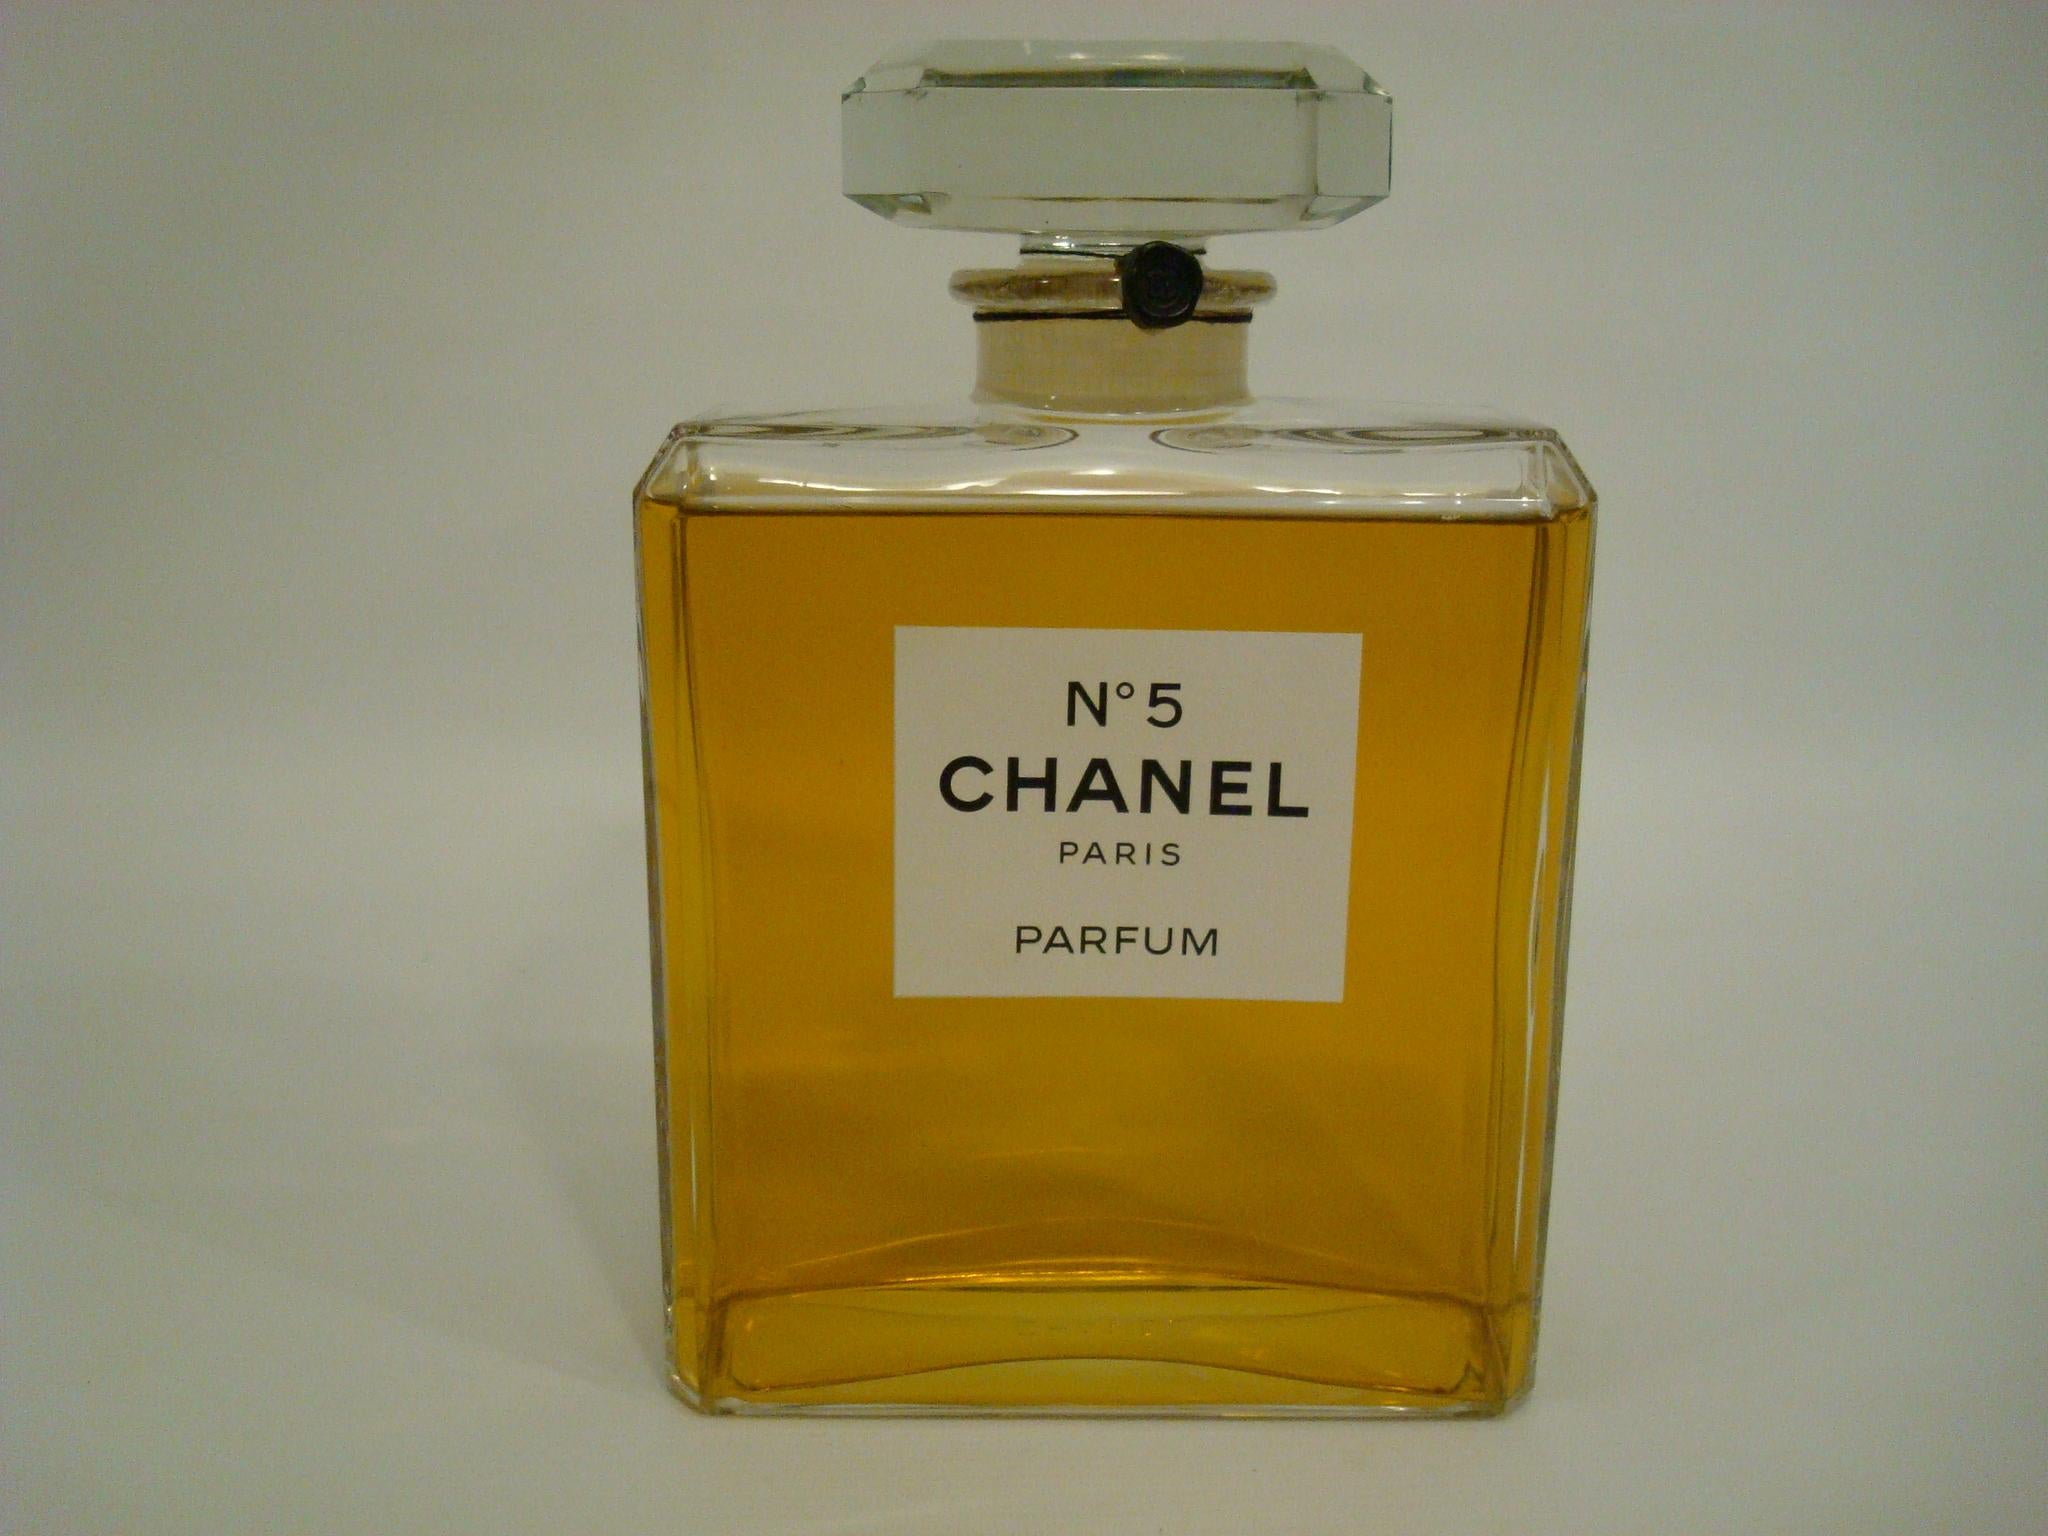 Chanel N5 huge store display perfume bottle advertising, France, 20th century.

Store display large perfume advertising. (factice / dummy perfume bottle, it's not perfume, it's colored water). Perfect to decorate a guest bathroom. Everyone loves